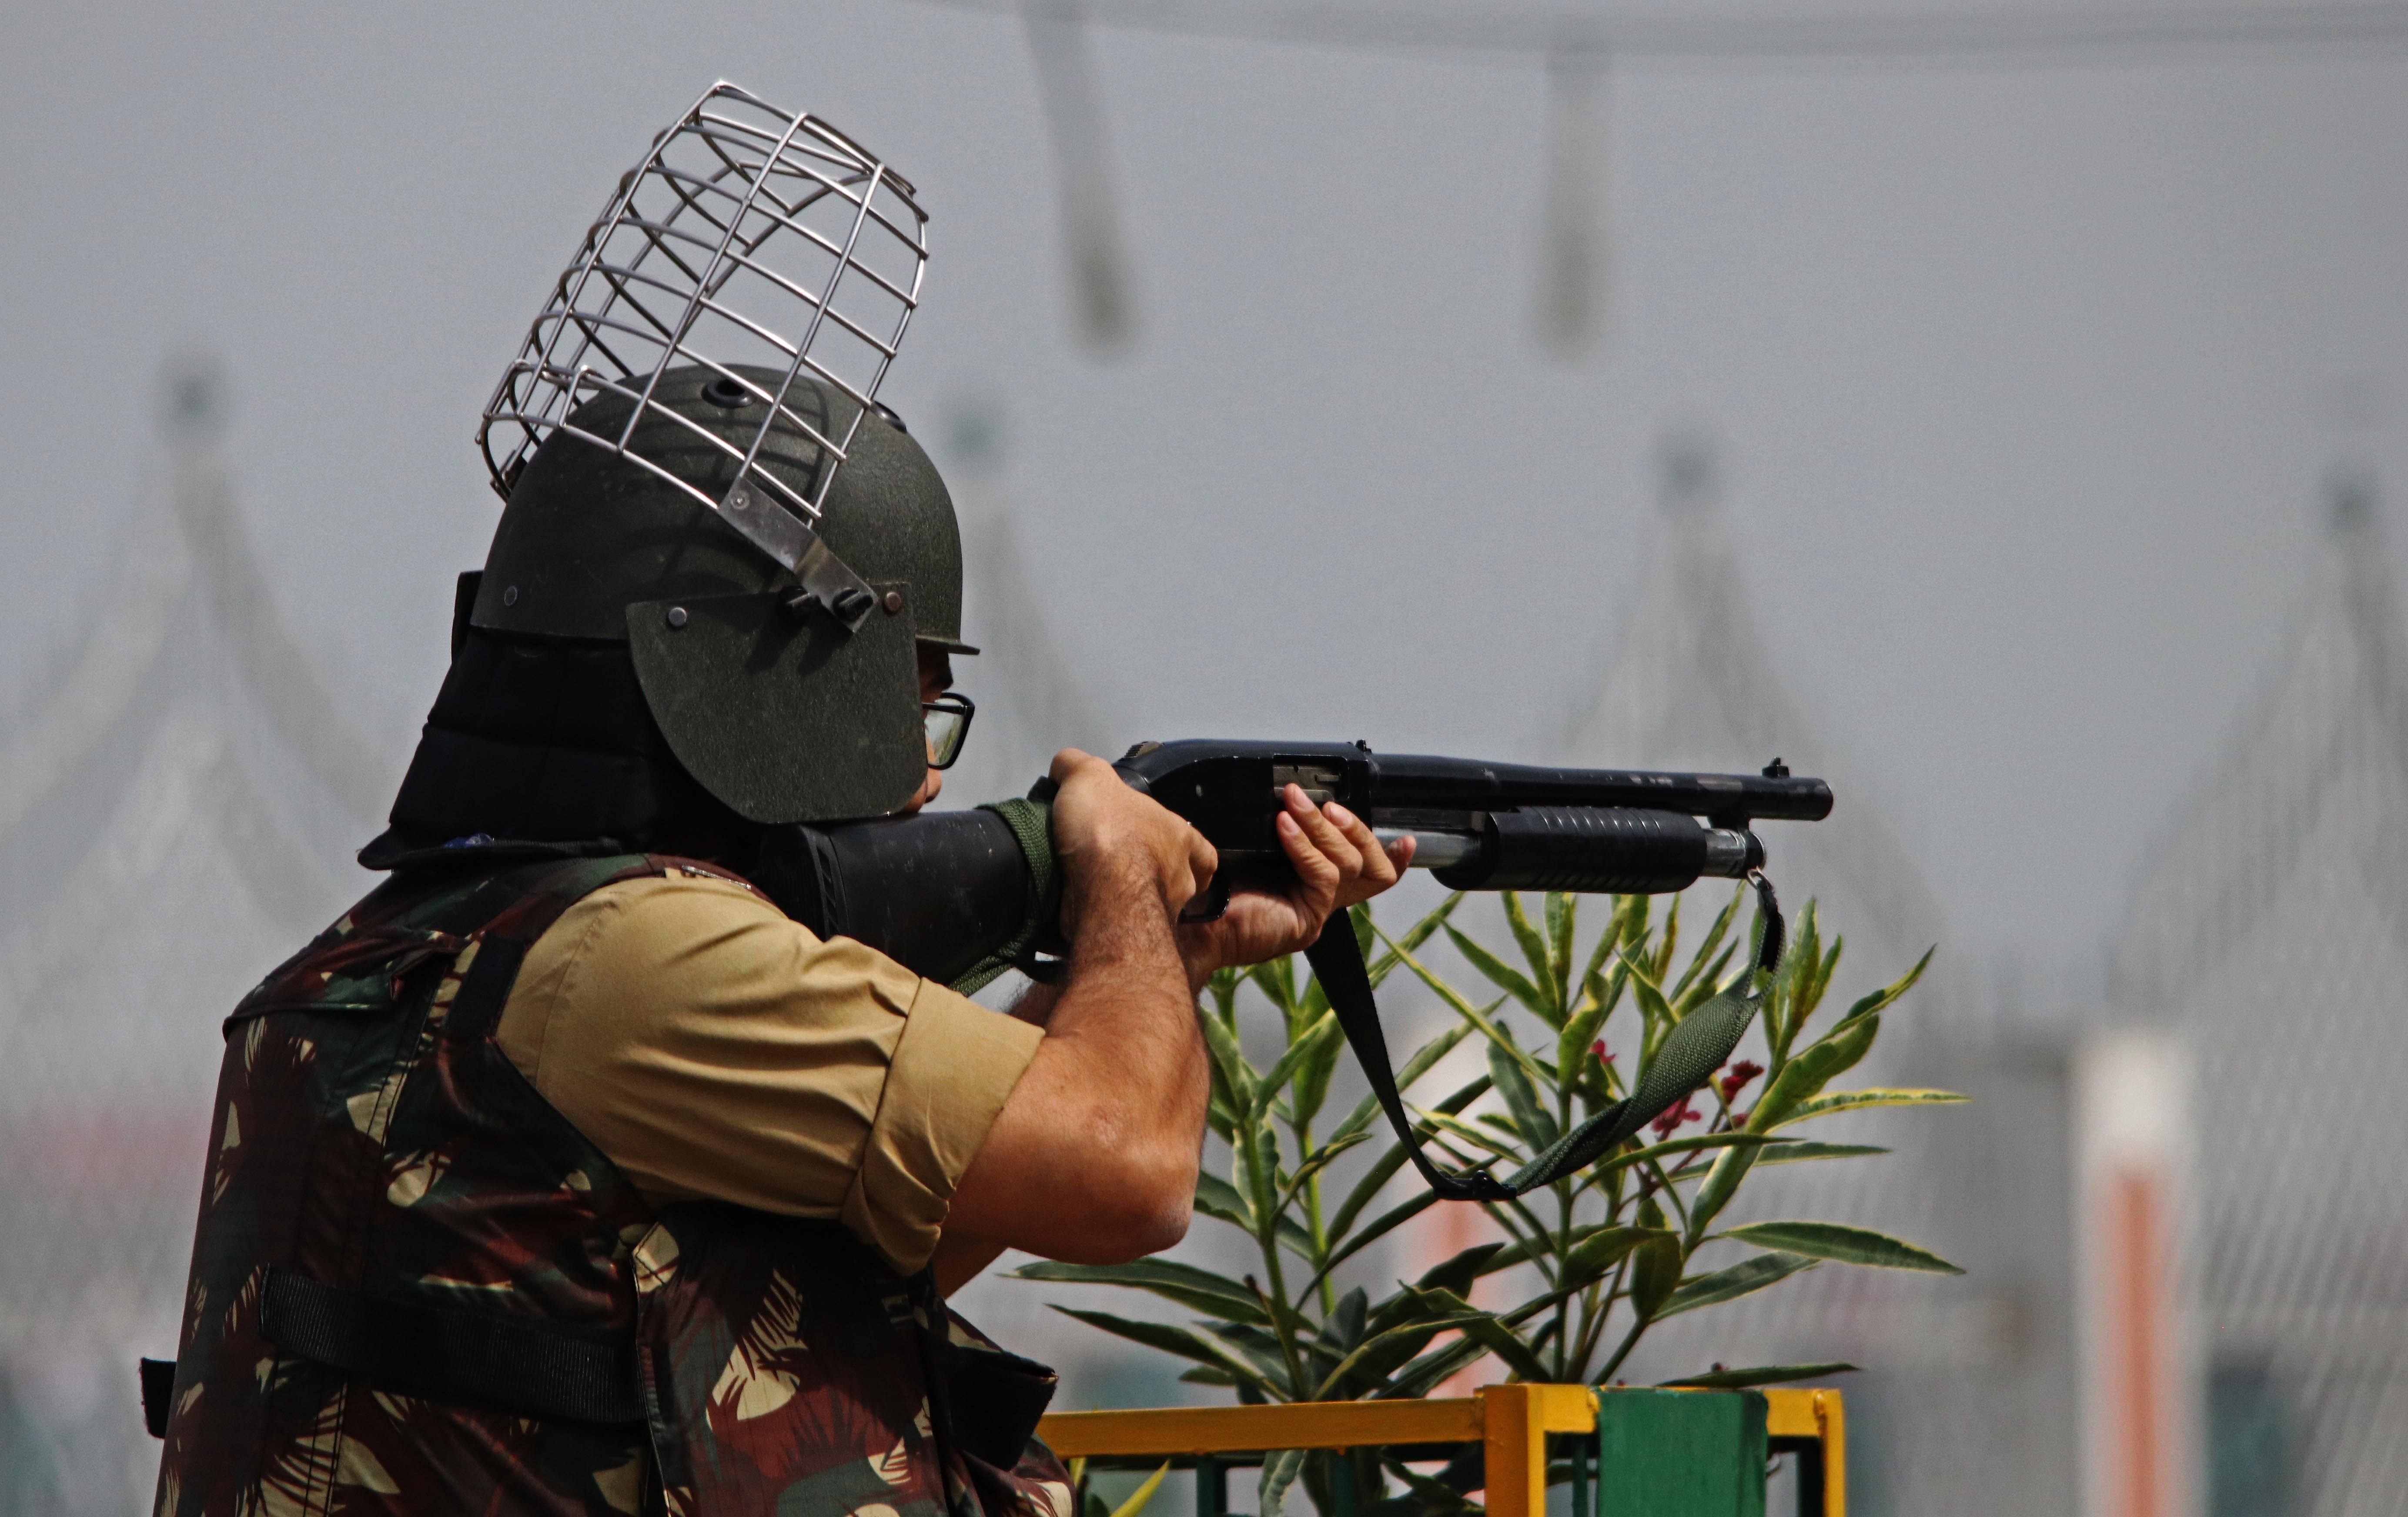 A pellet gun being used in Kashmir. Credit: DH News Service